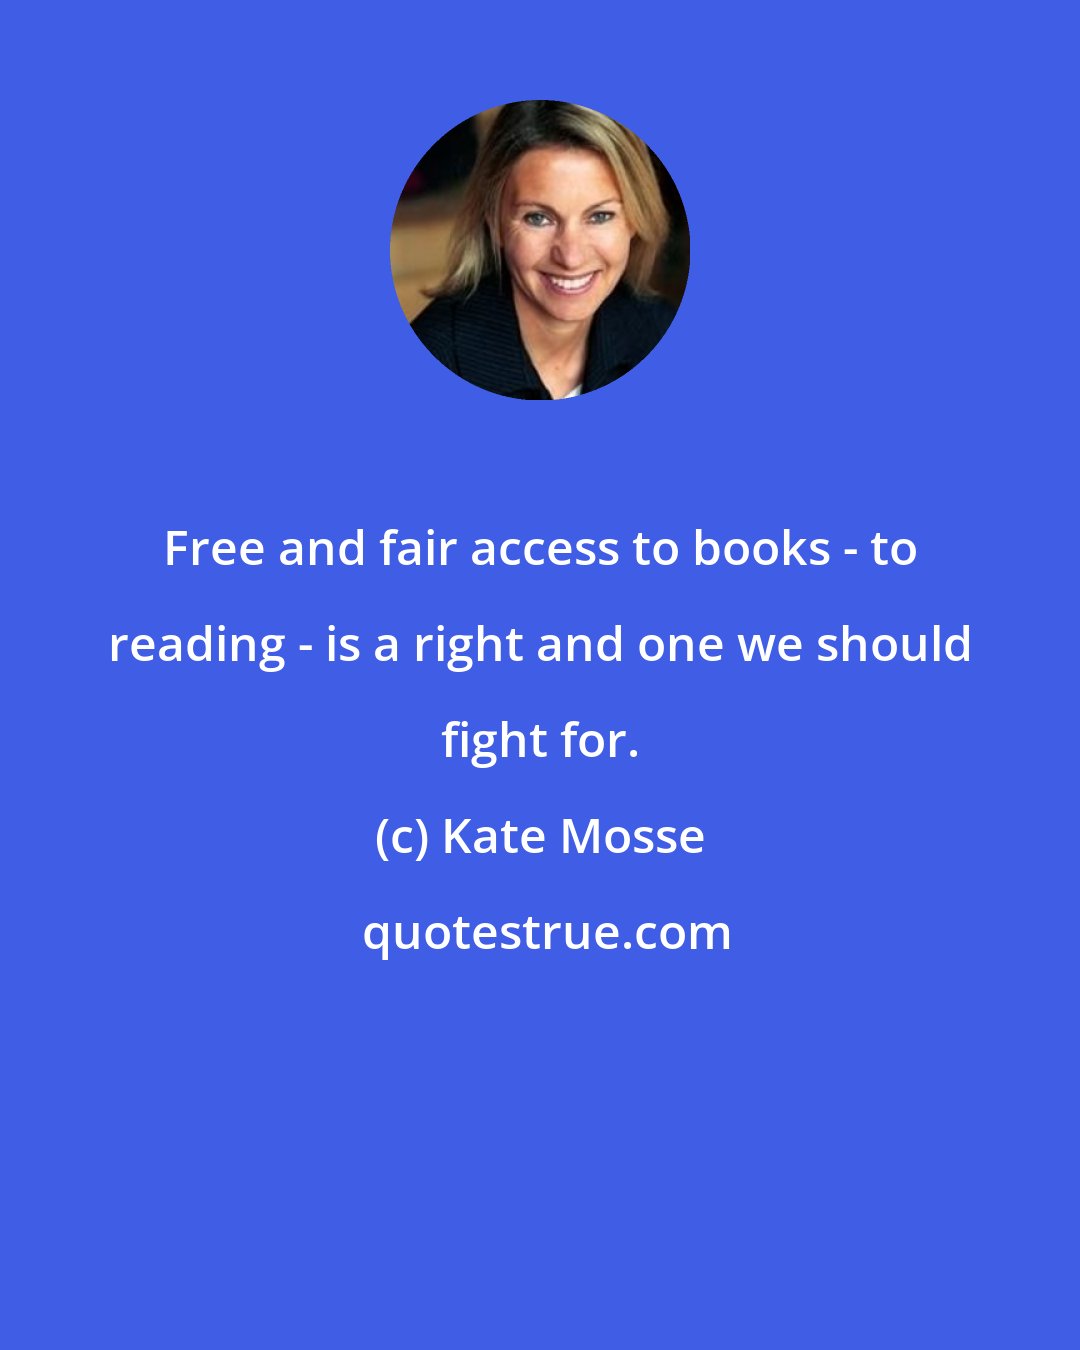 Kate Mosse: Free and fair access to books - to reading - is a right and one we should fight for.